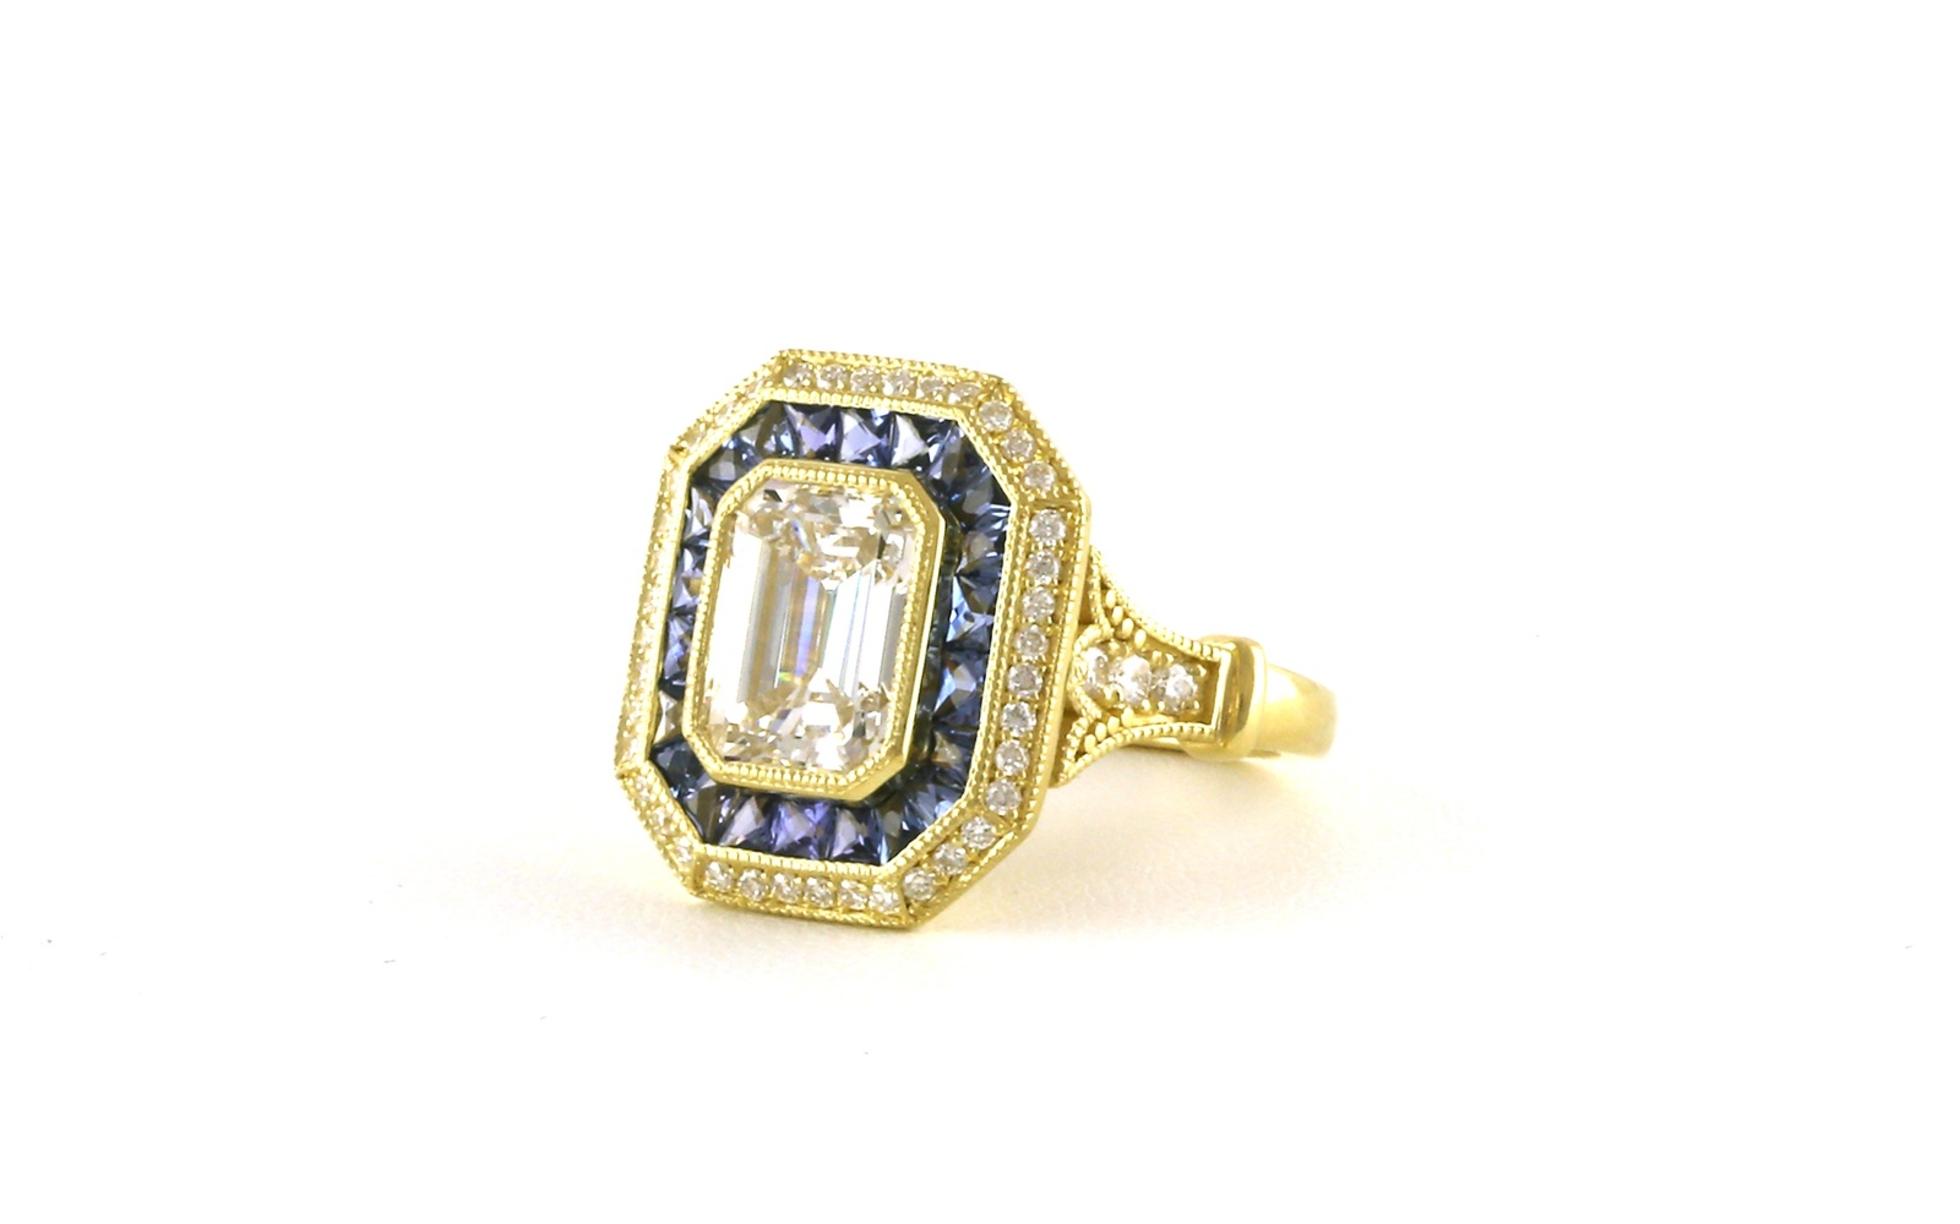 Double Halo Emerald-cut Diamond and Montana Yogo Sapphire Cocktail Ring with Hand Engraving in Yellow Gold (3.88cts TWT) angled